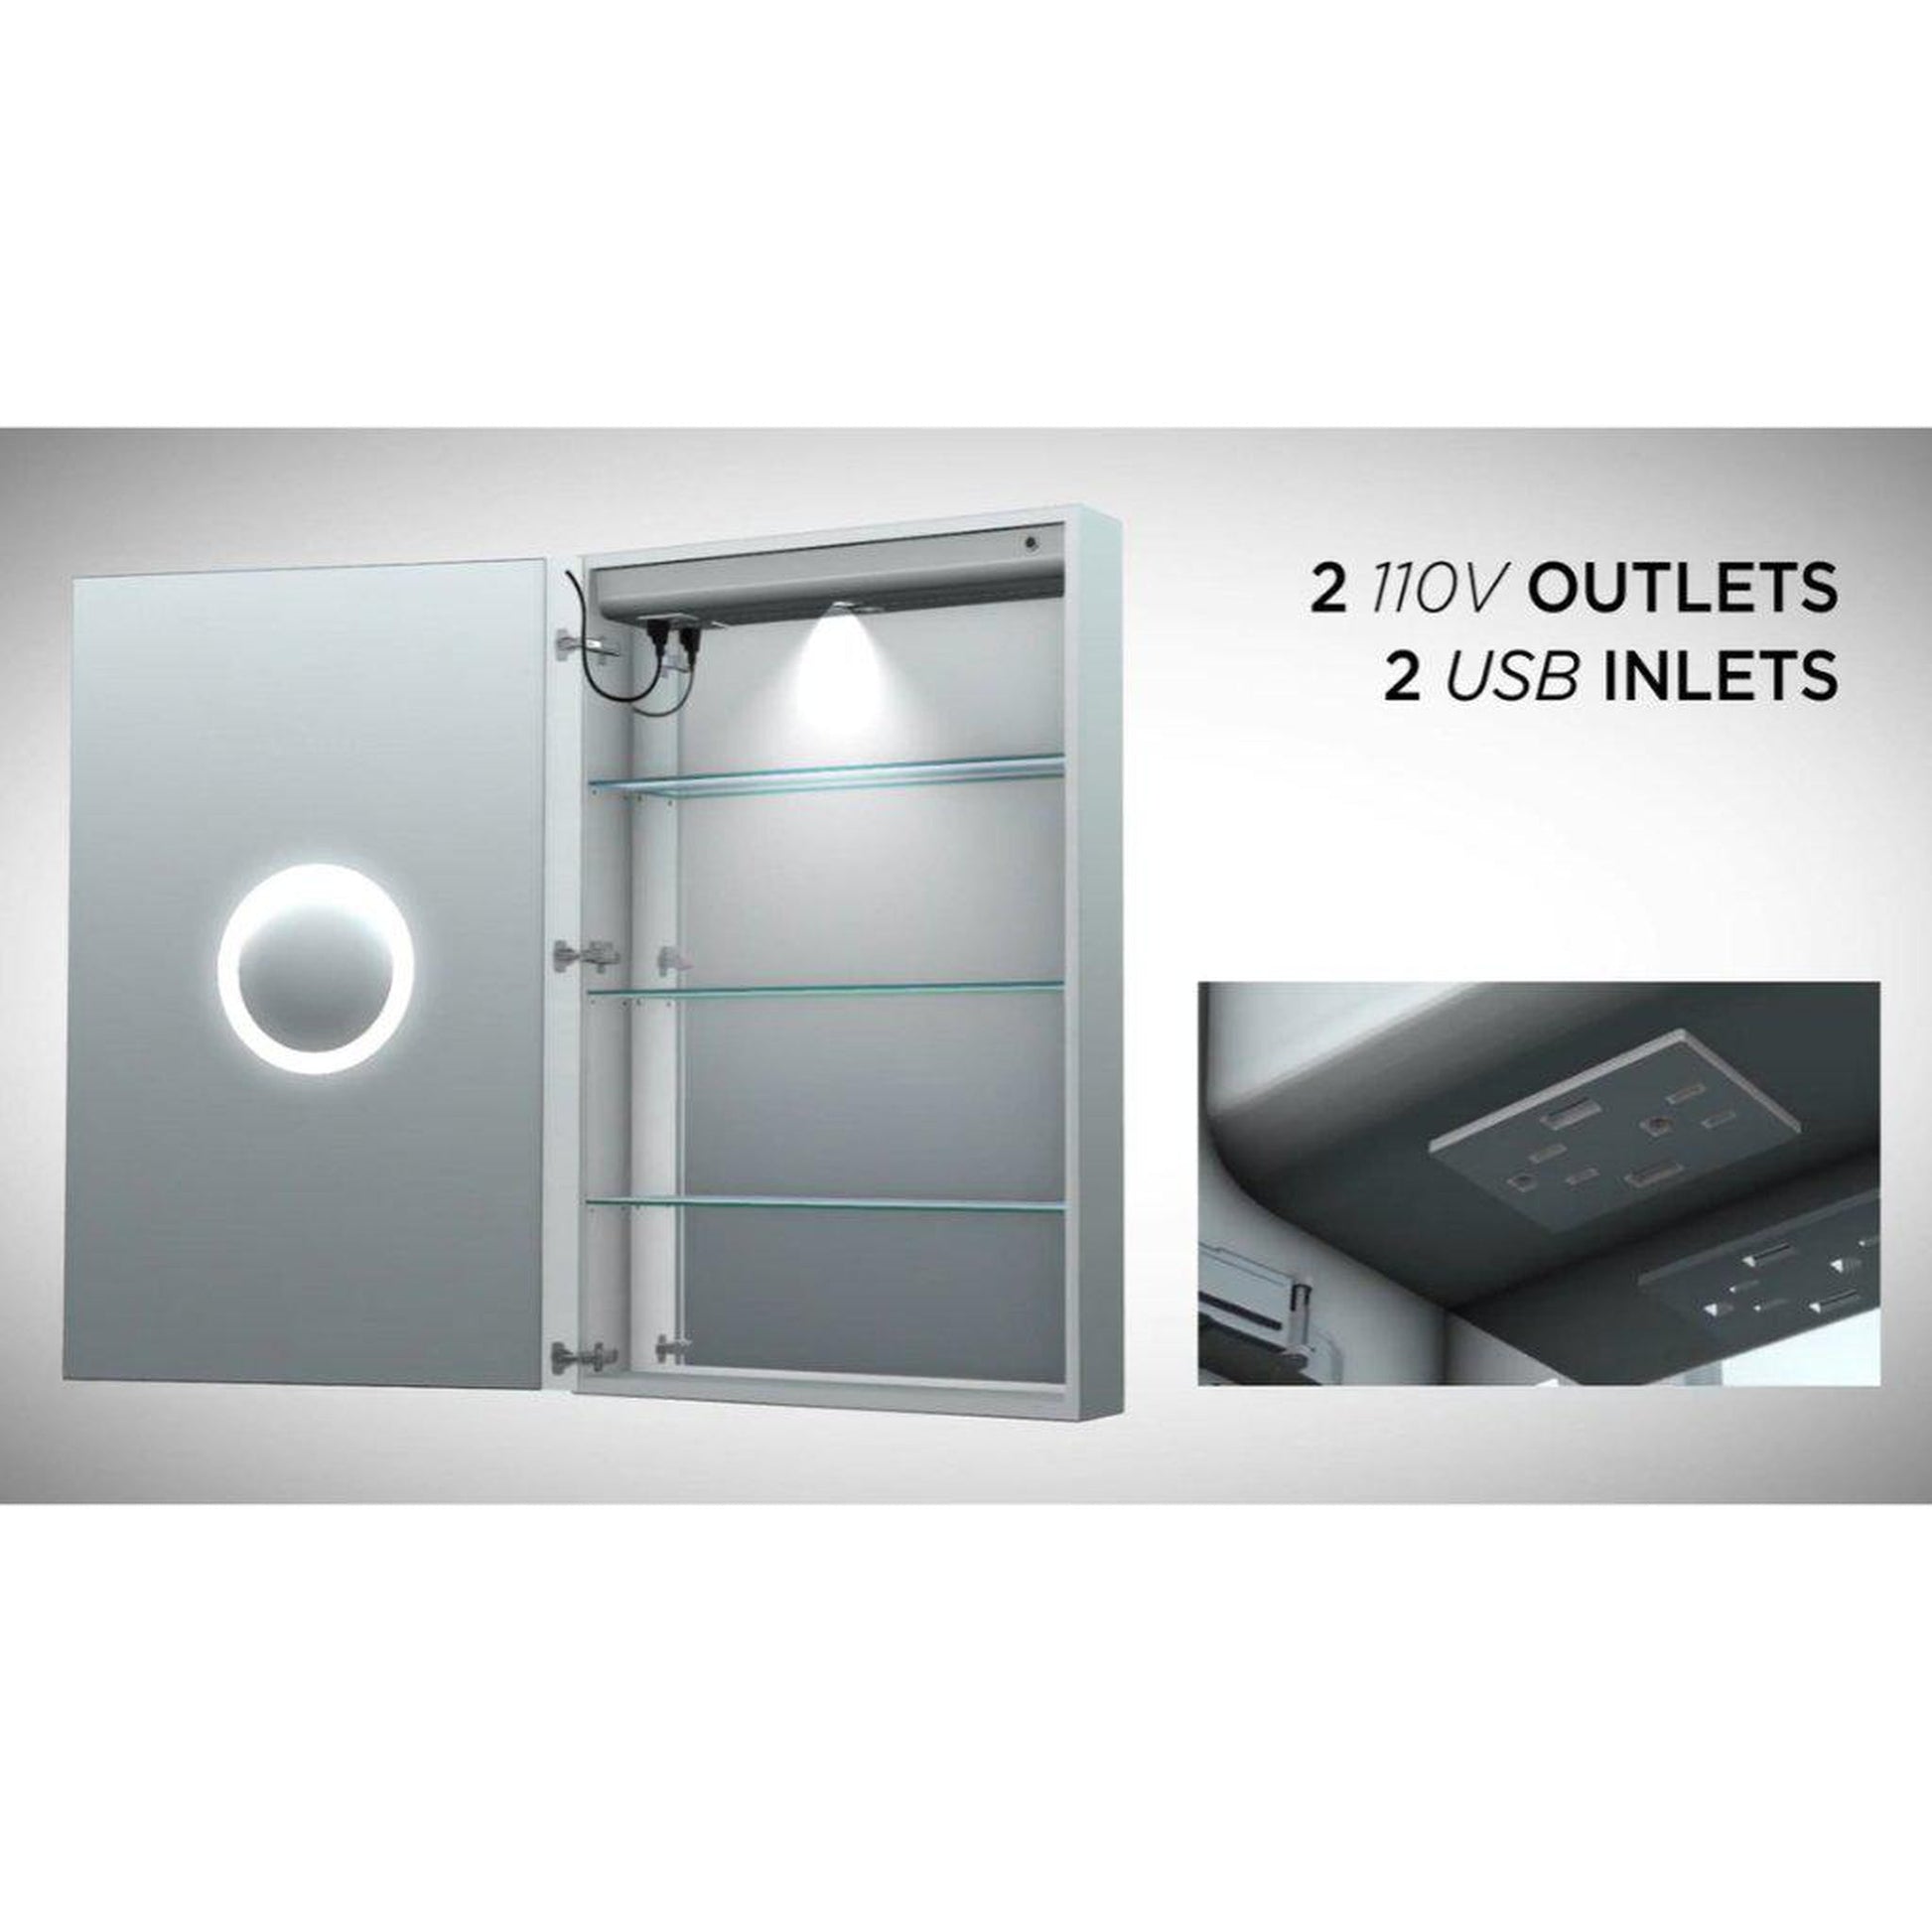 Krugg Reflections Svange 60" x 36" 5000K Single Tri-View Left-Right-Right Opening Recessed/Surface-Mount Illuminated Silver Backed LED Medicine Cabinet Mirror With Built-in Defogger, Dimmer and Electrical Outlet